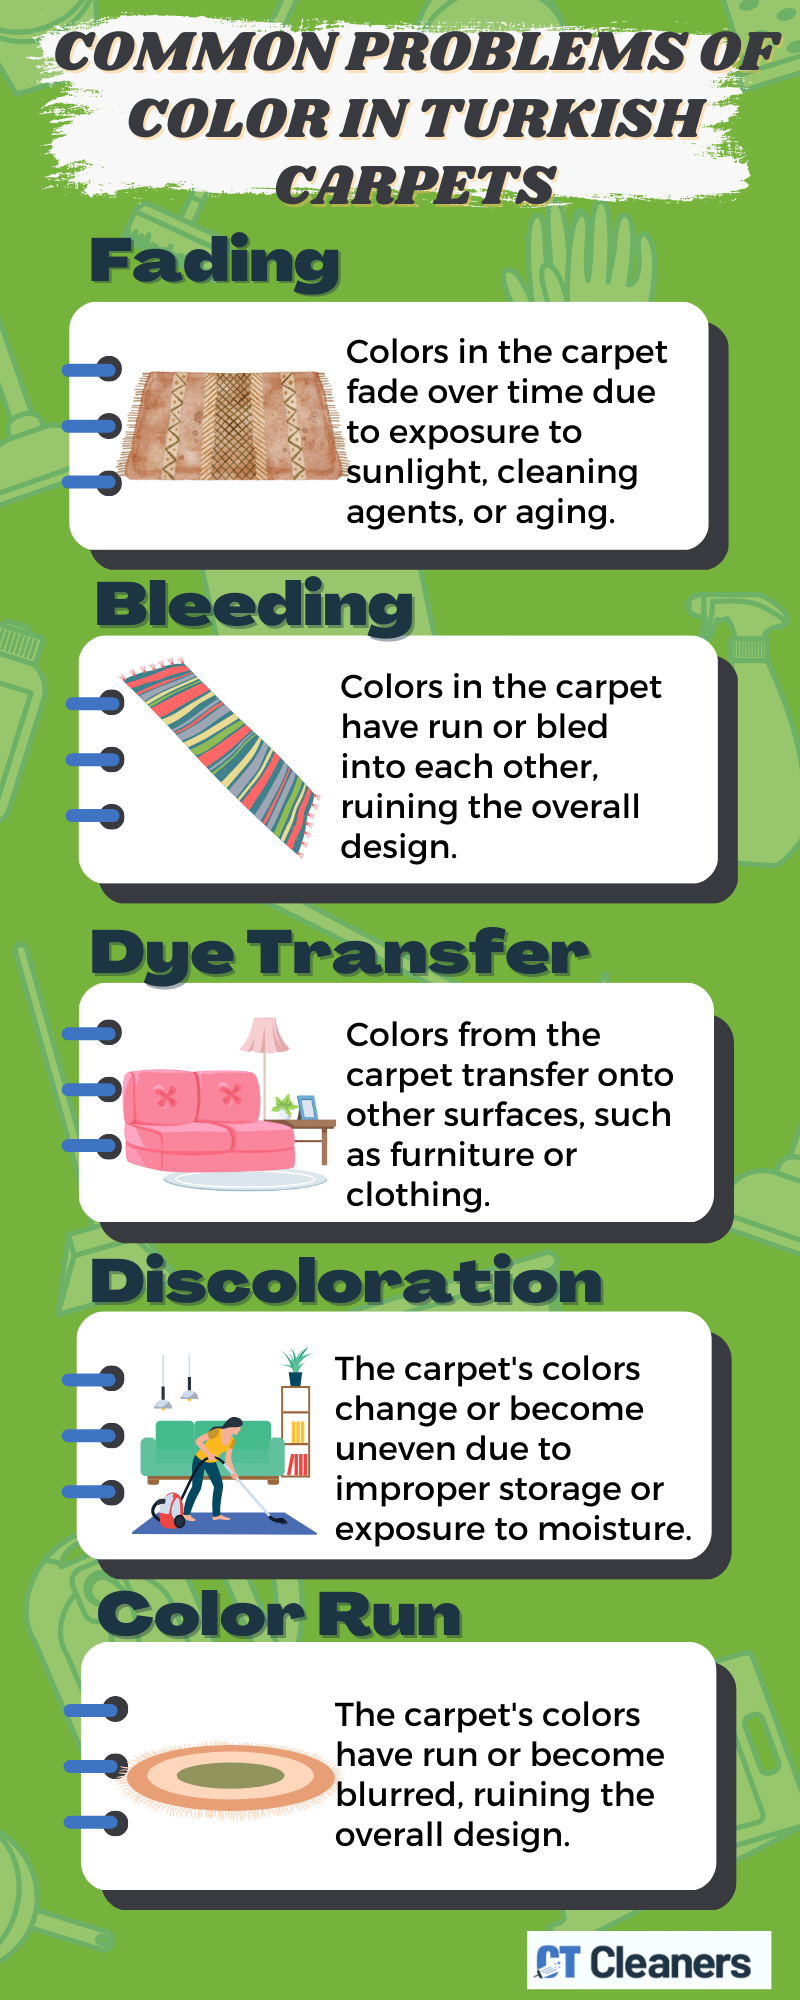 Common Problems of Color in Turkish Carpets